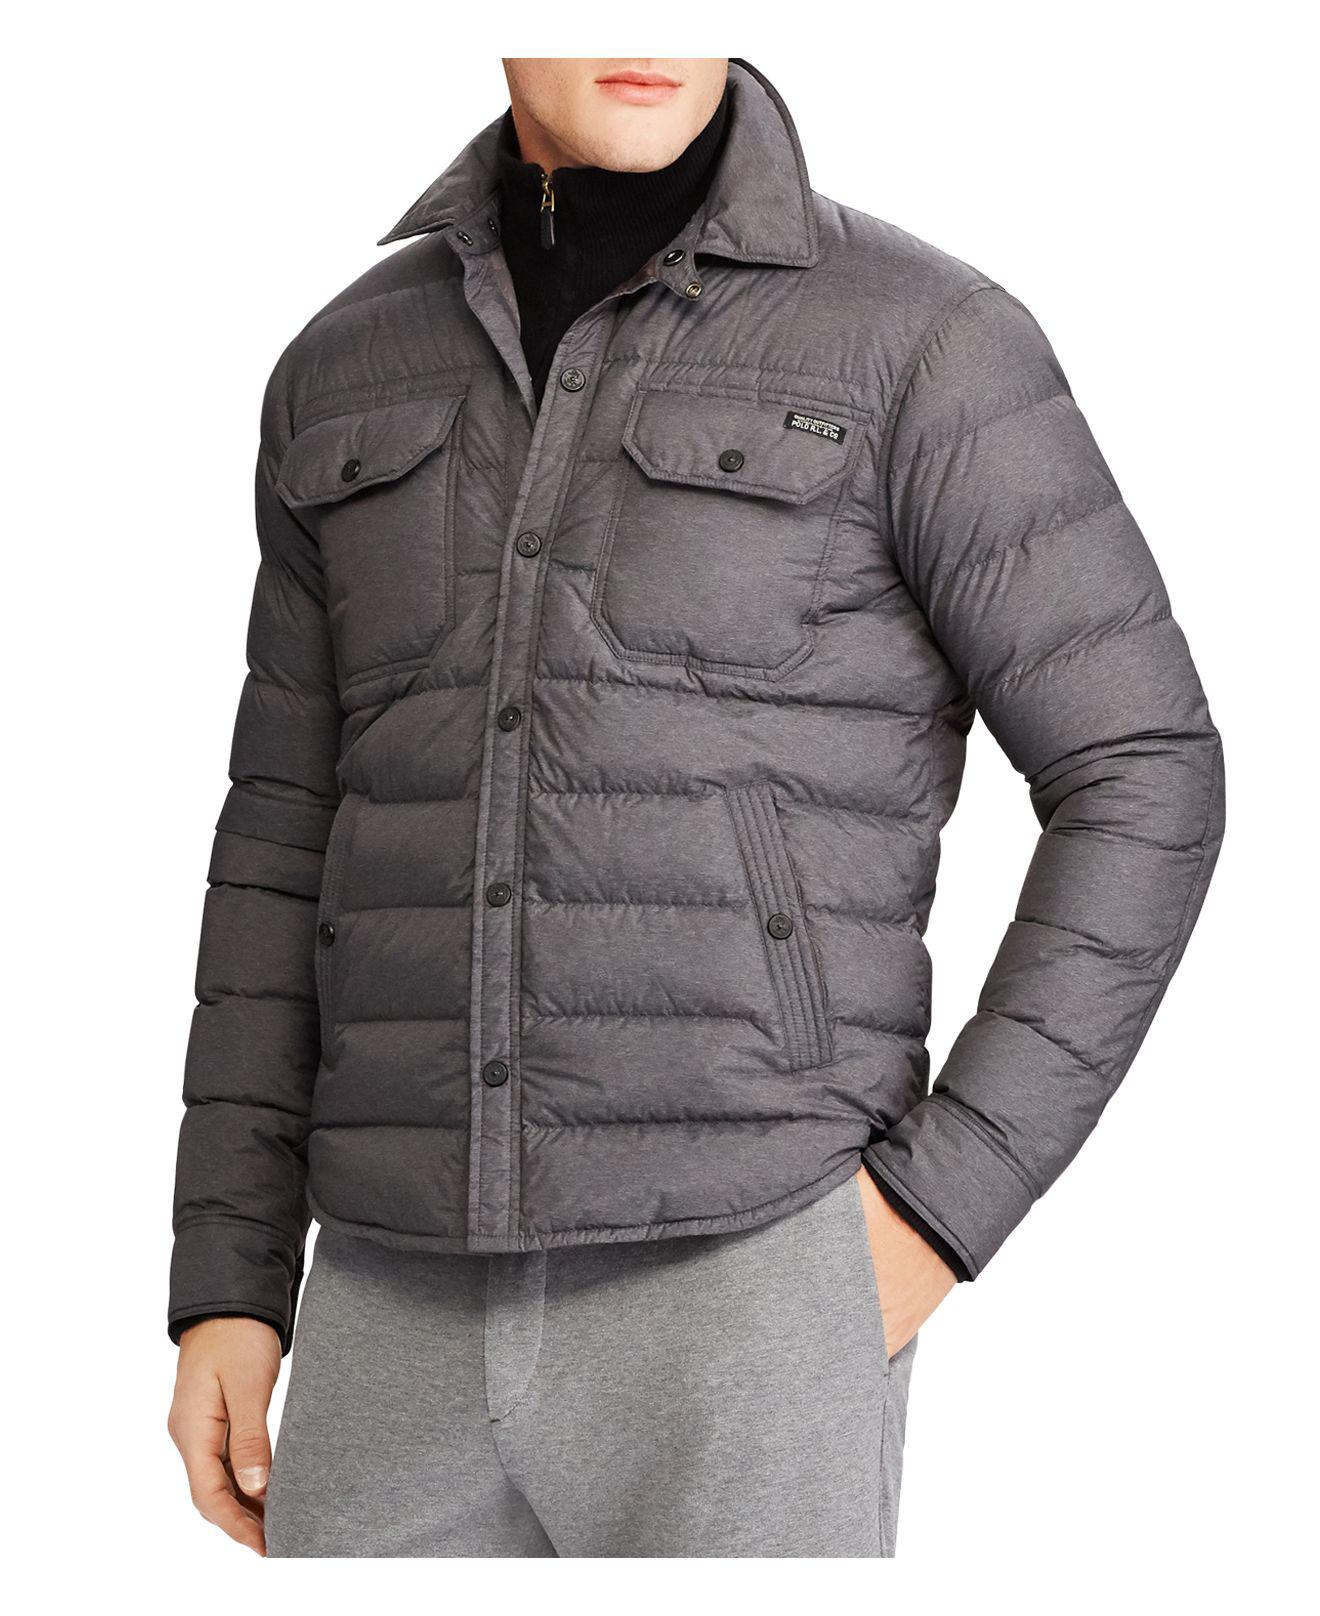 Polo Ralph Lauren Synthetic Quilted Down Shirt Jacket in Gray for Men - Lyst